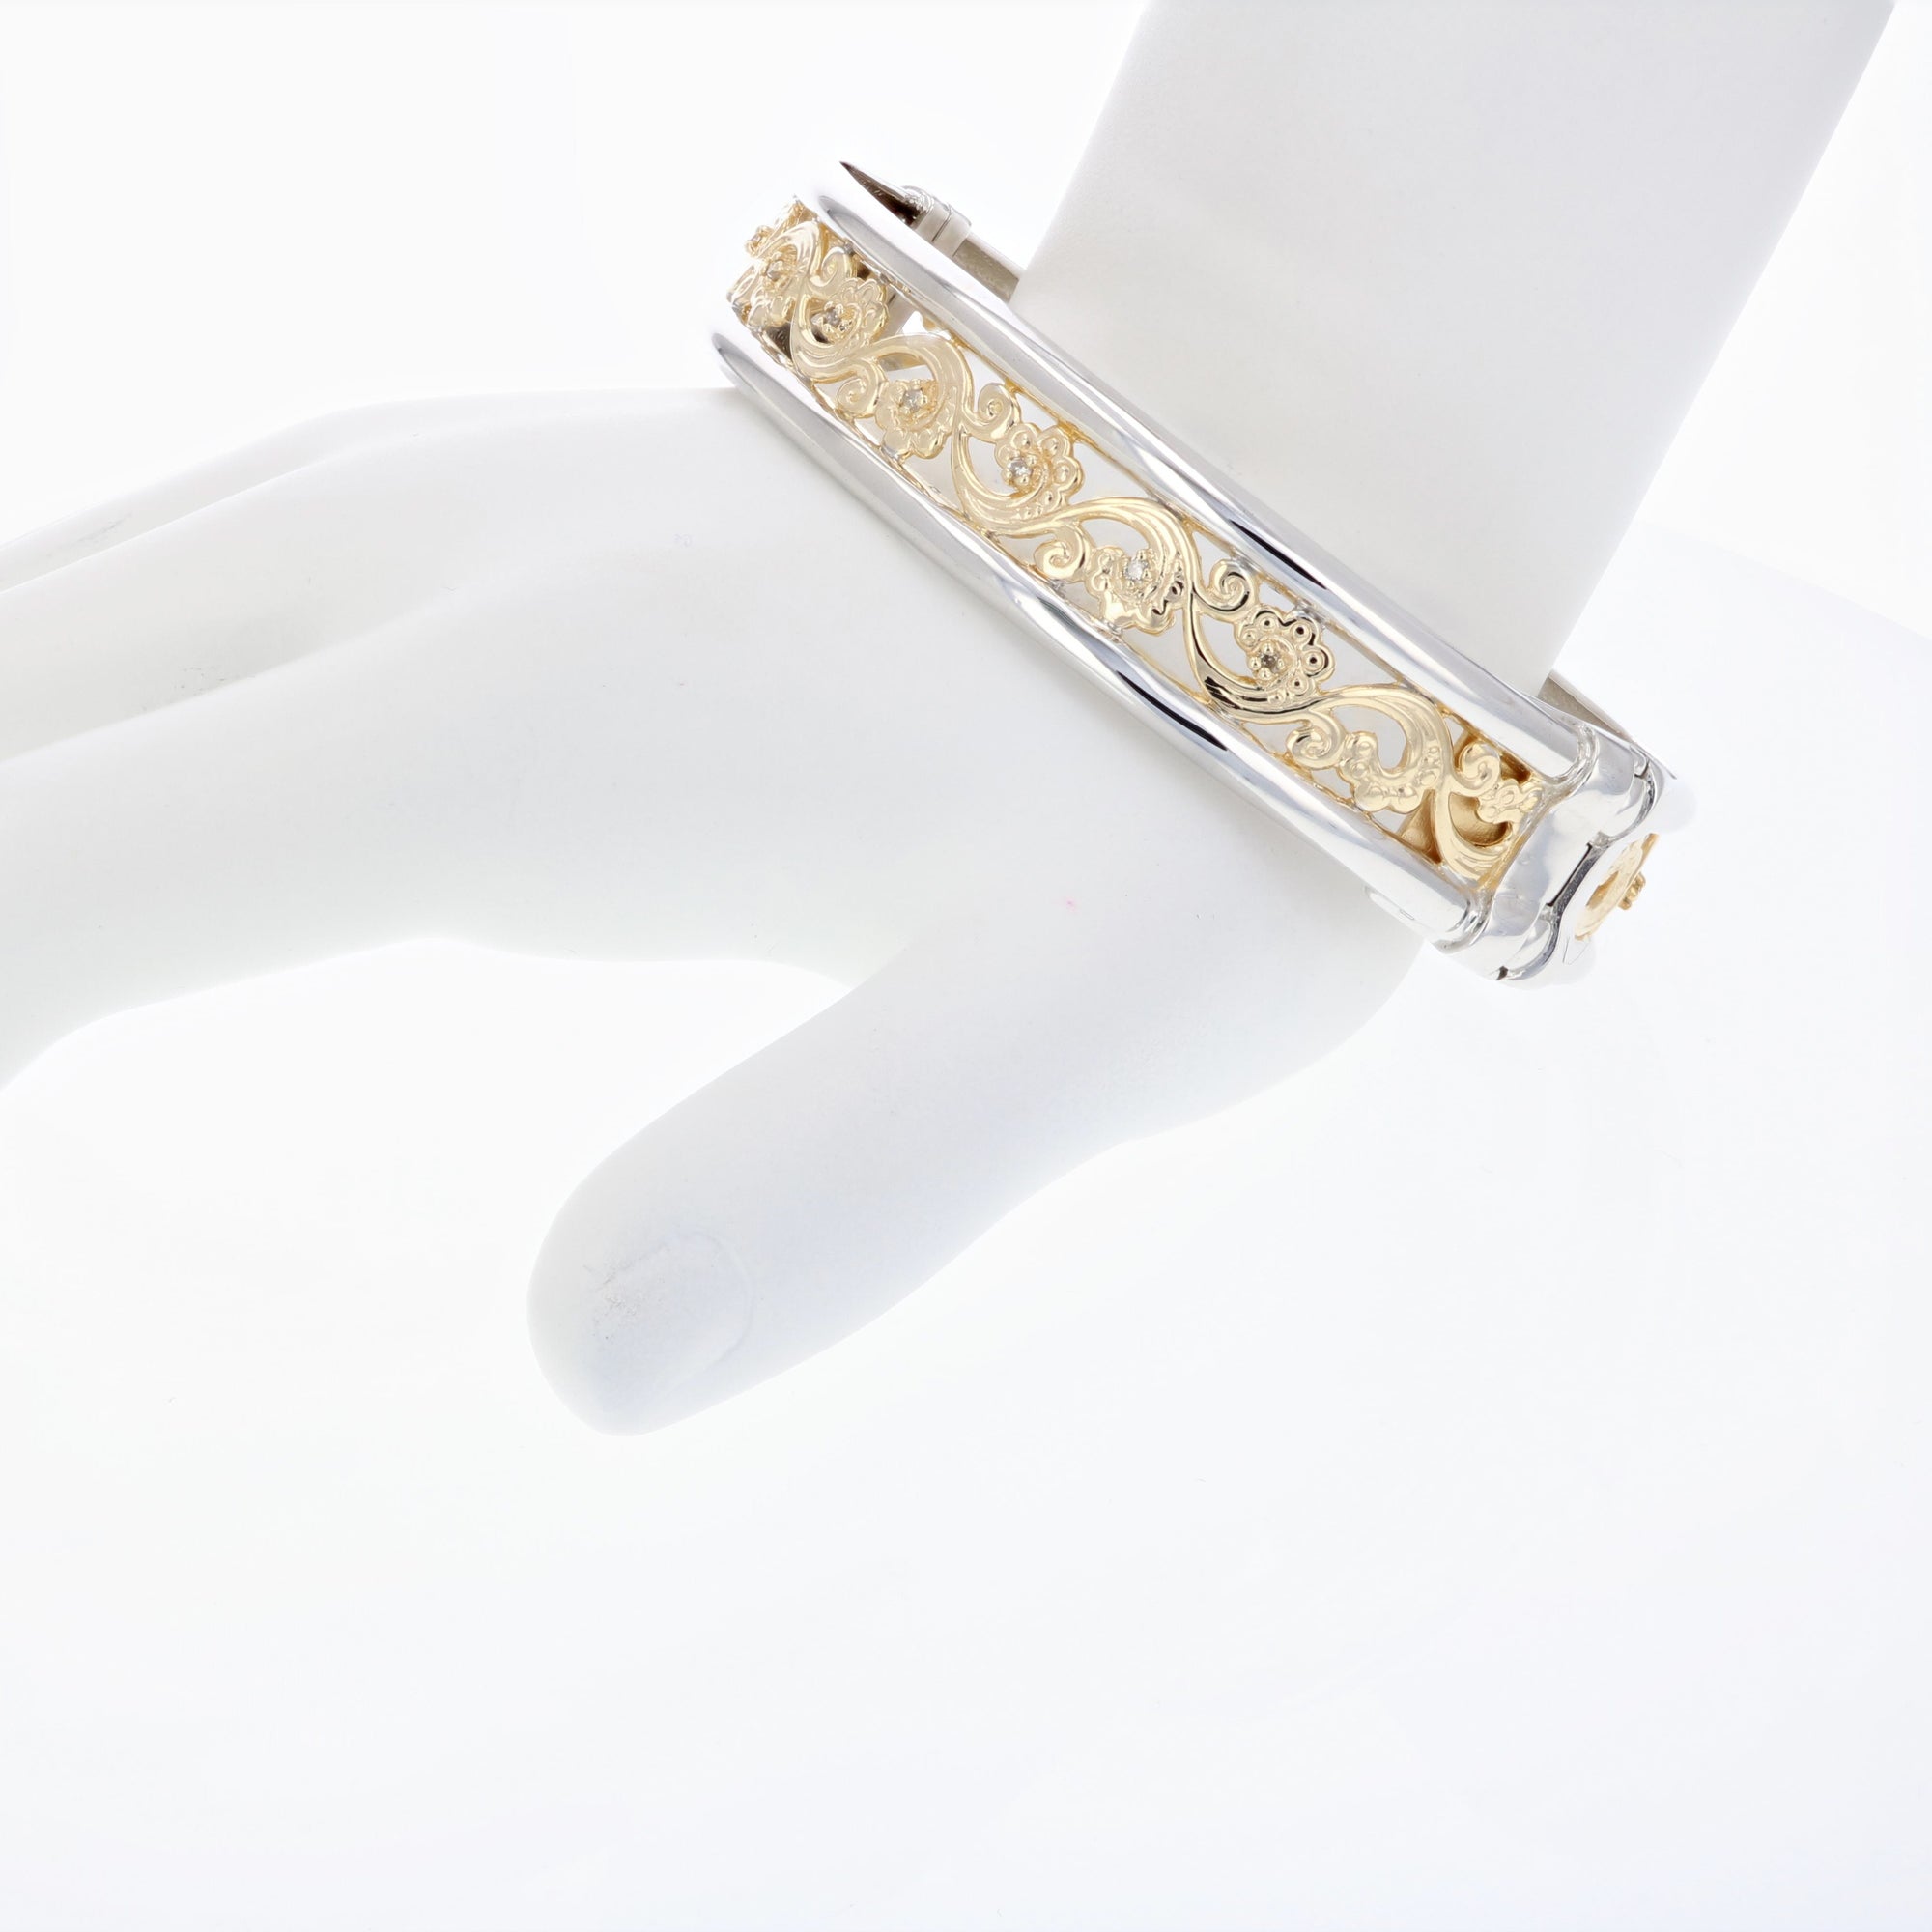 1/5 cttw Diamond Bangle Bracelet Yellow Gold Plated over Silver Swirl Style